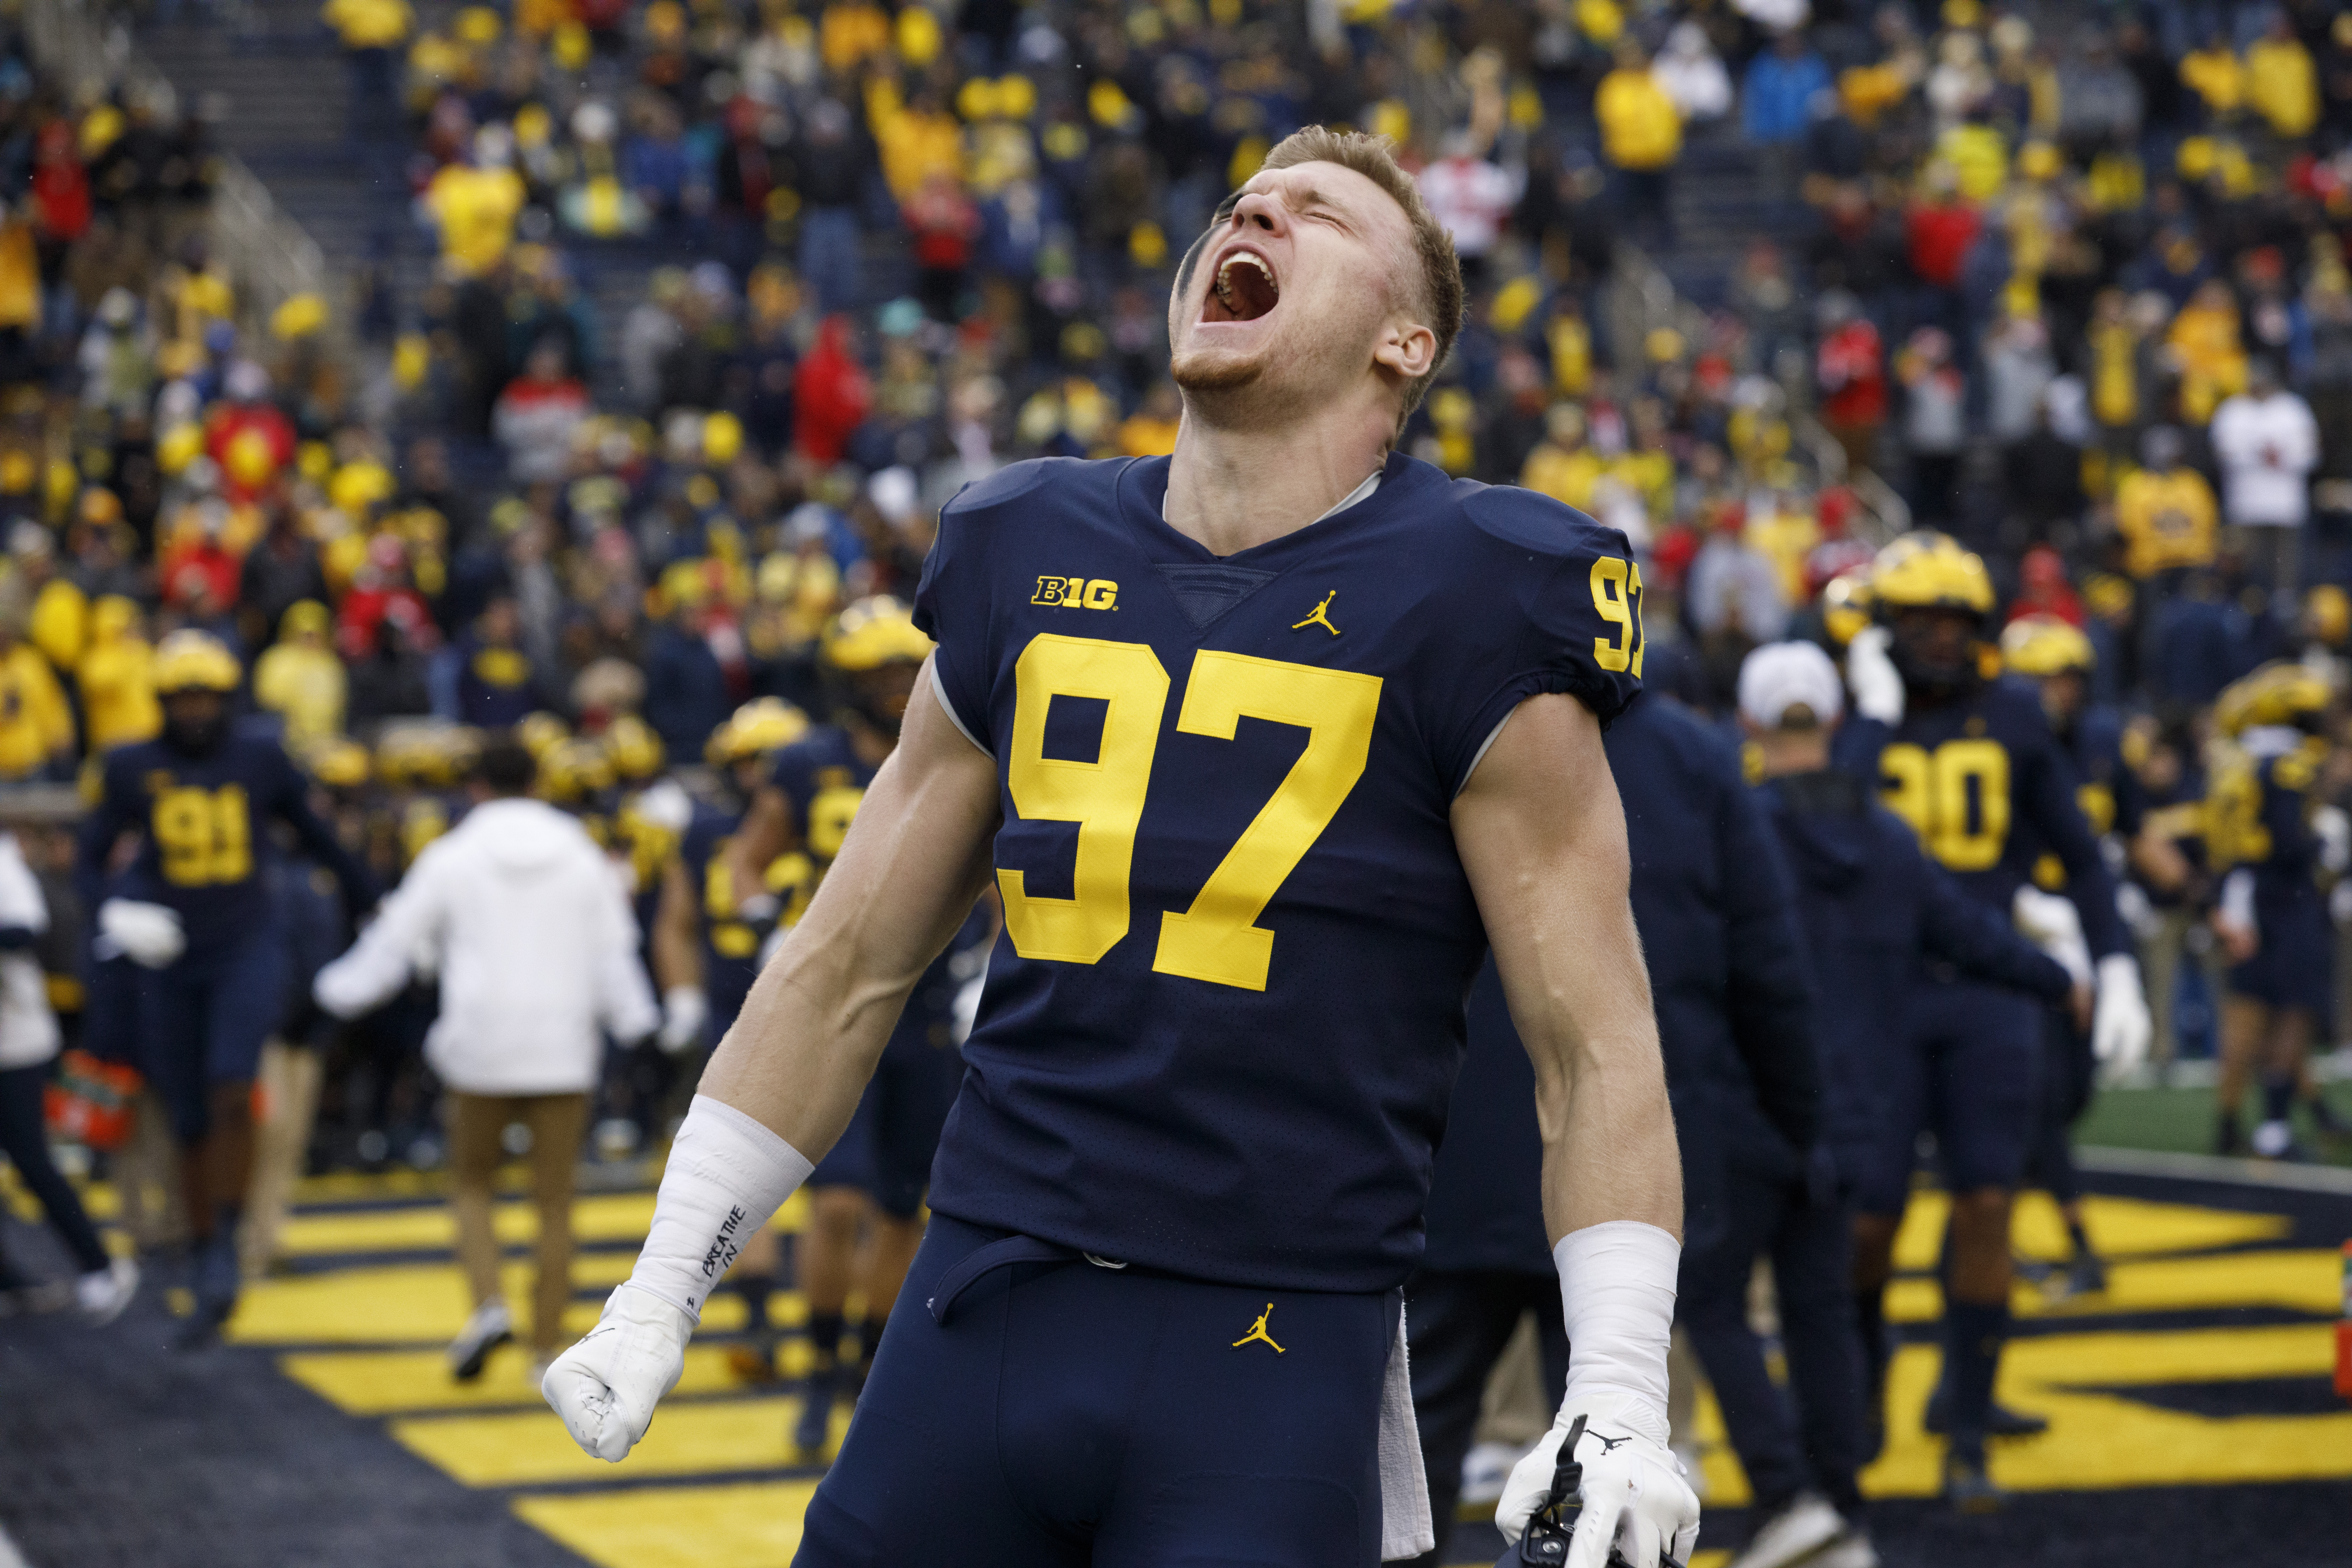 Michigan's Aidan Hutchinson sets record, bolsters Heisman case with 'dominant' performance